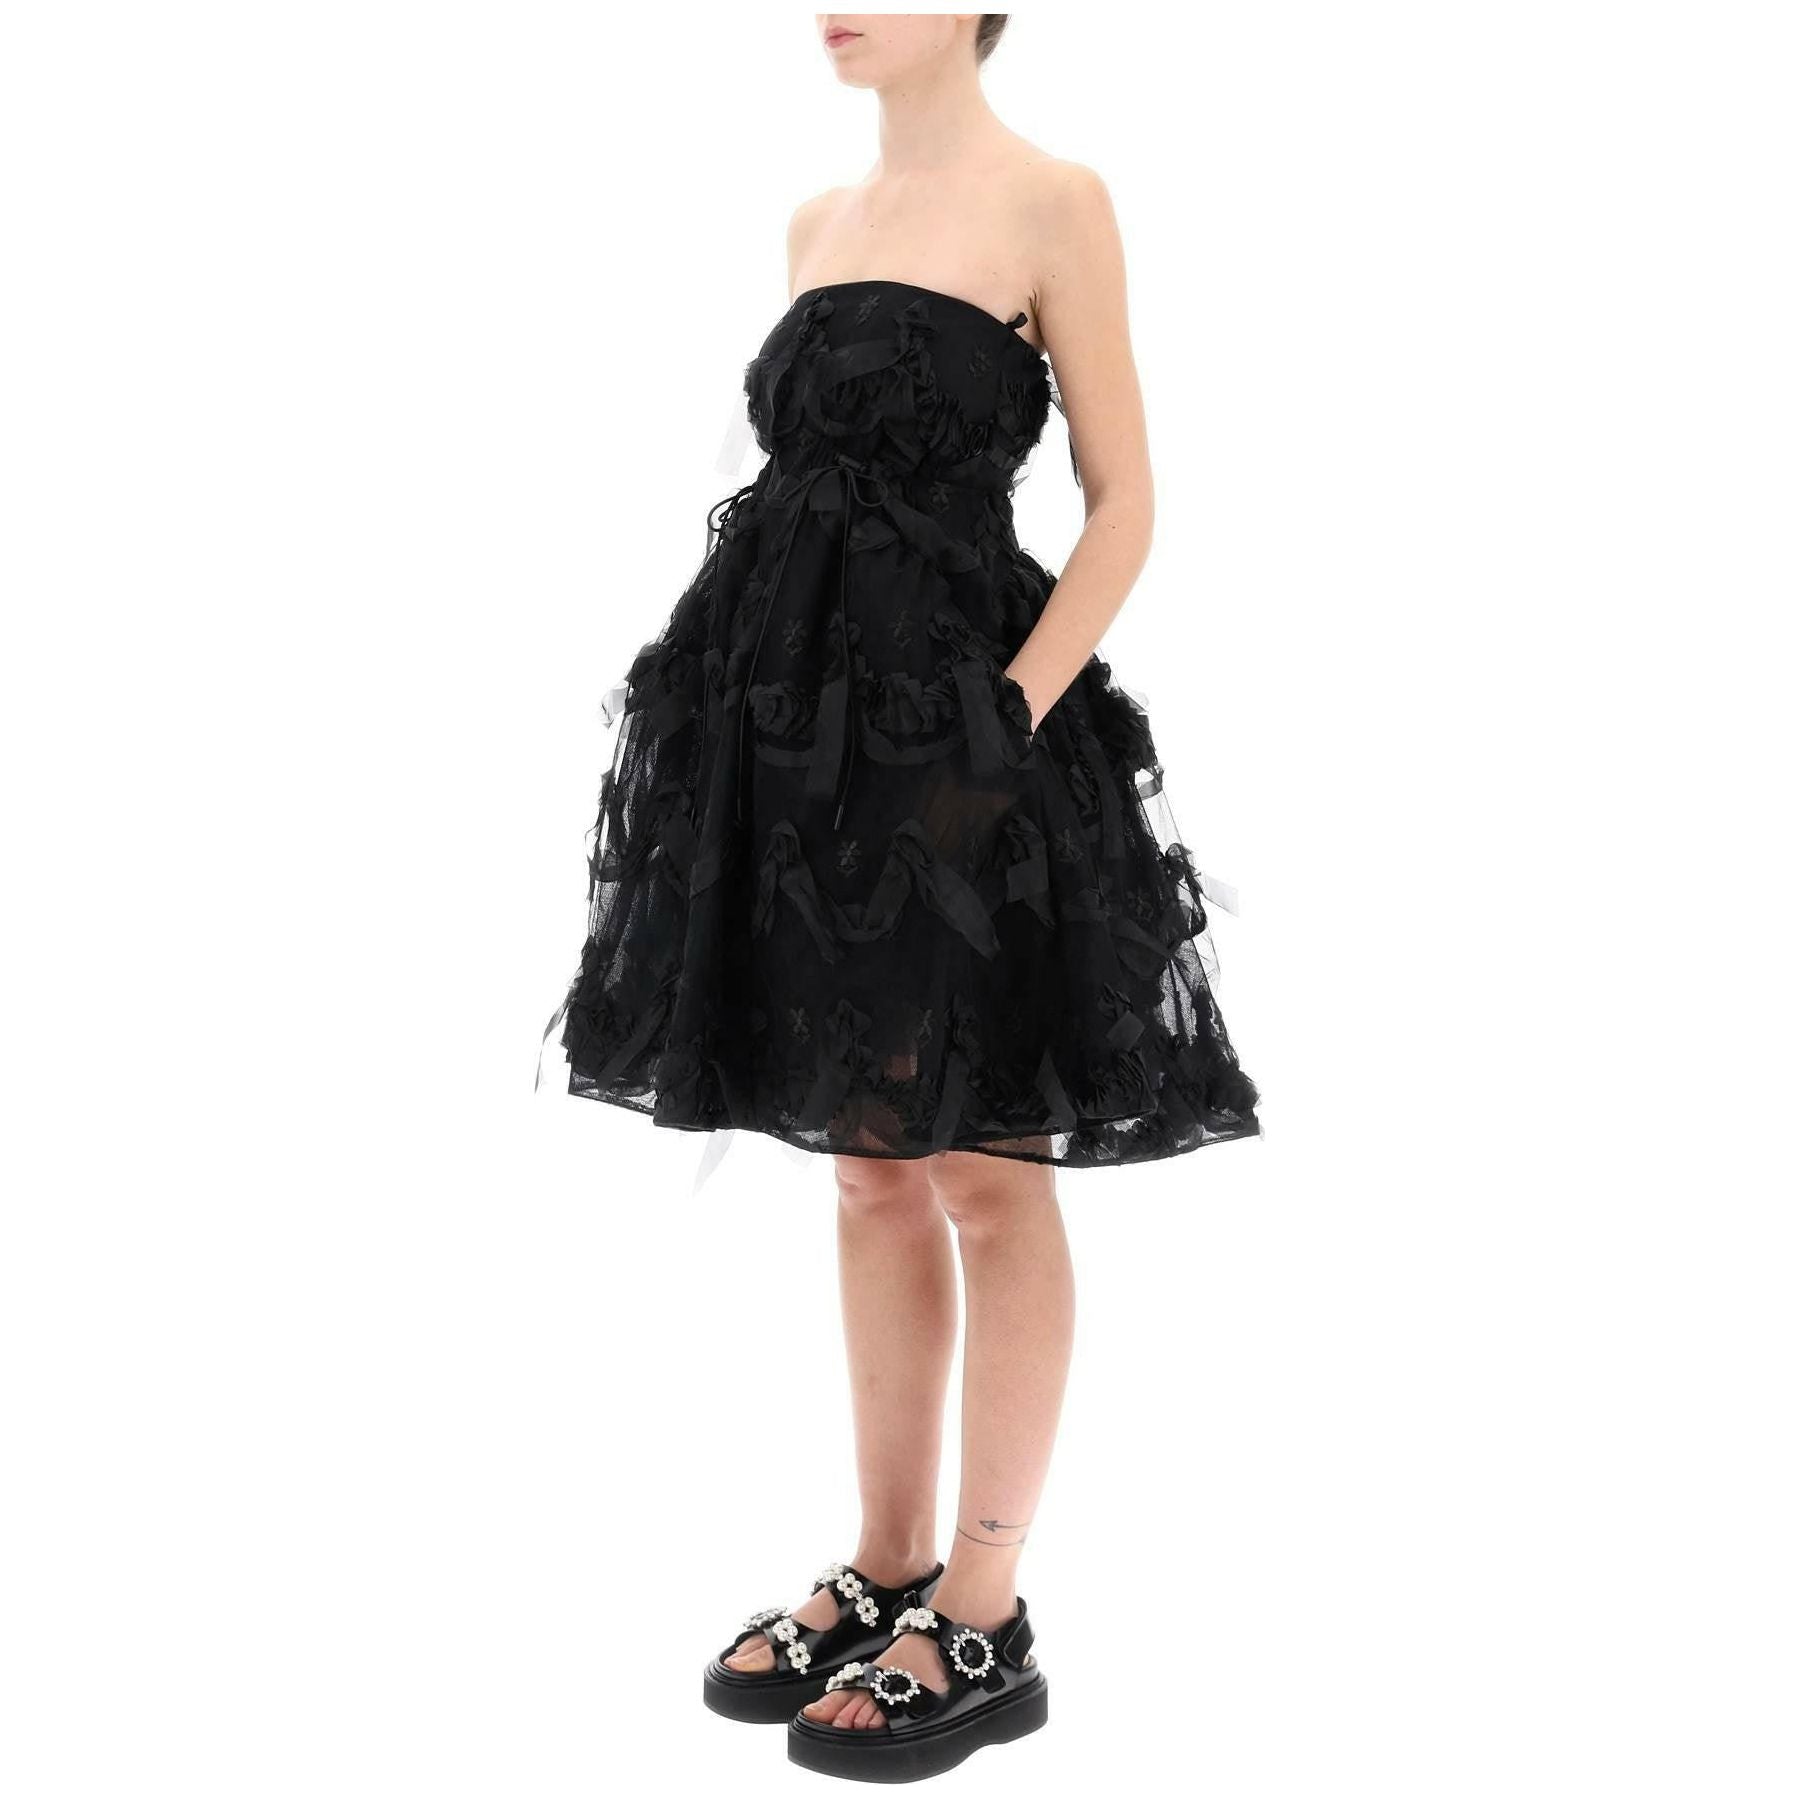 Black Tulle Dress With Bows And Embroidery SIMONE ROCHA JOHN JULIA.